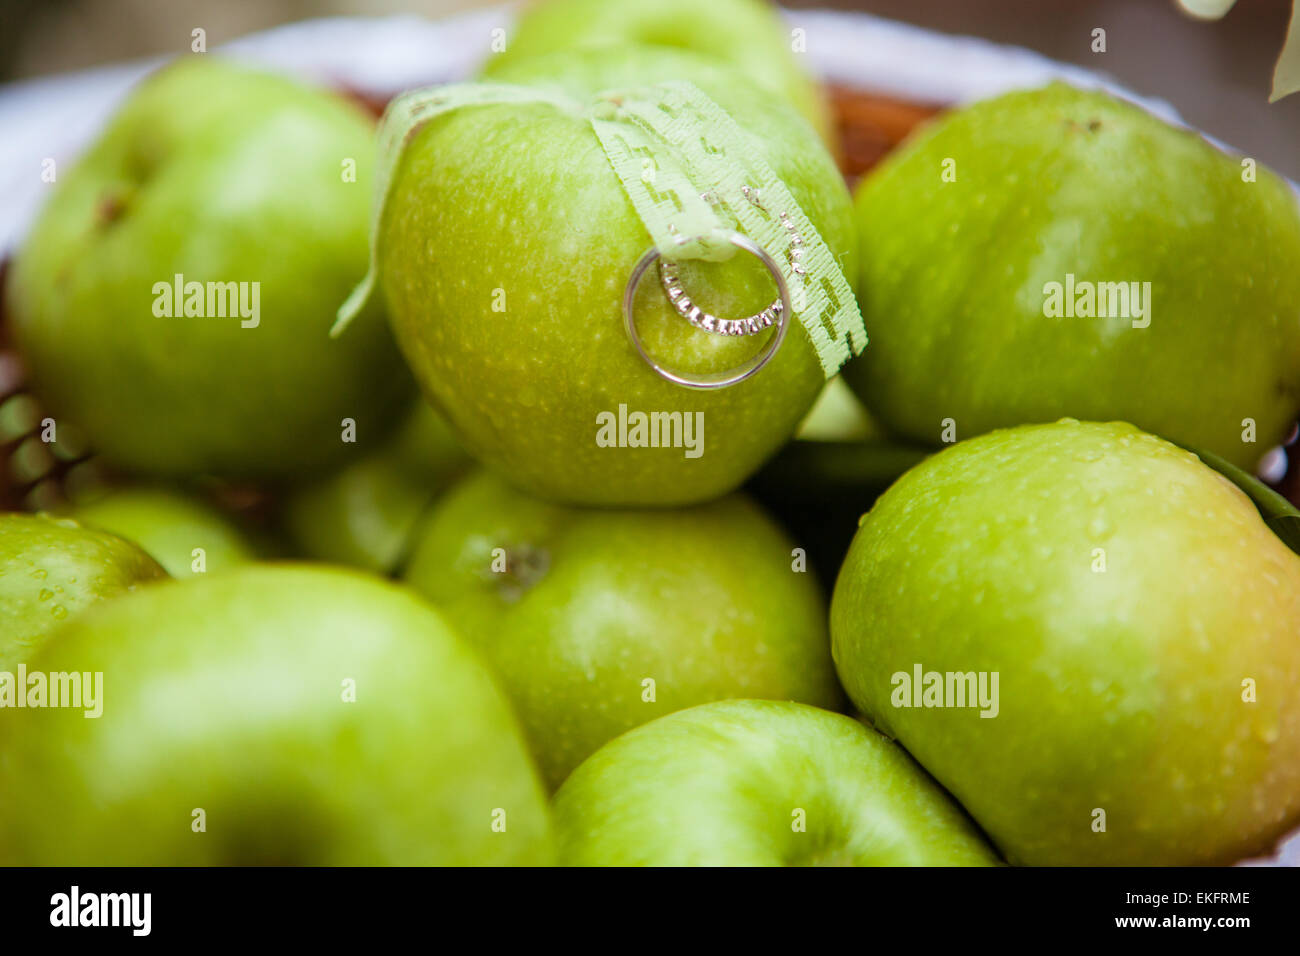 wedding rings on the green apples Stock Photo